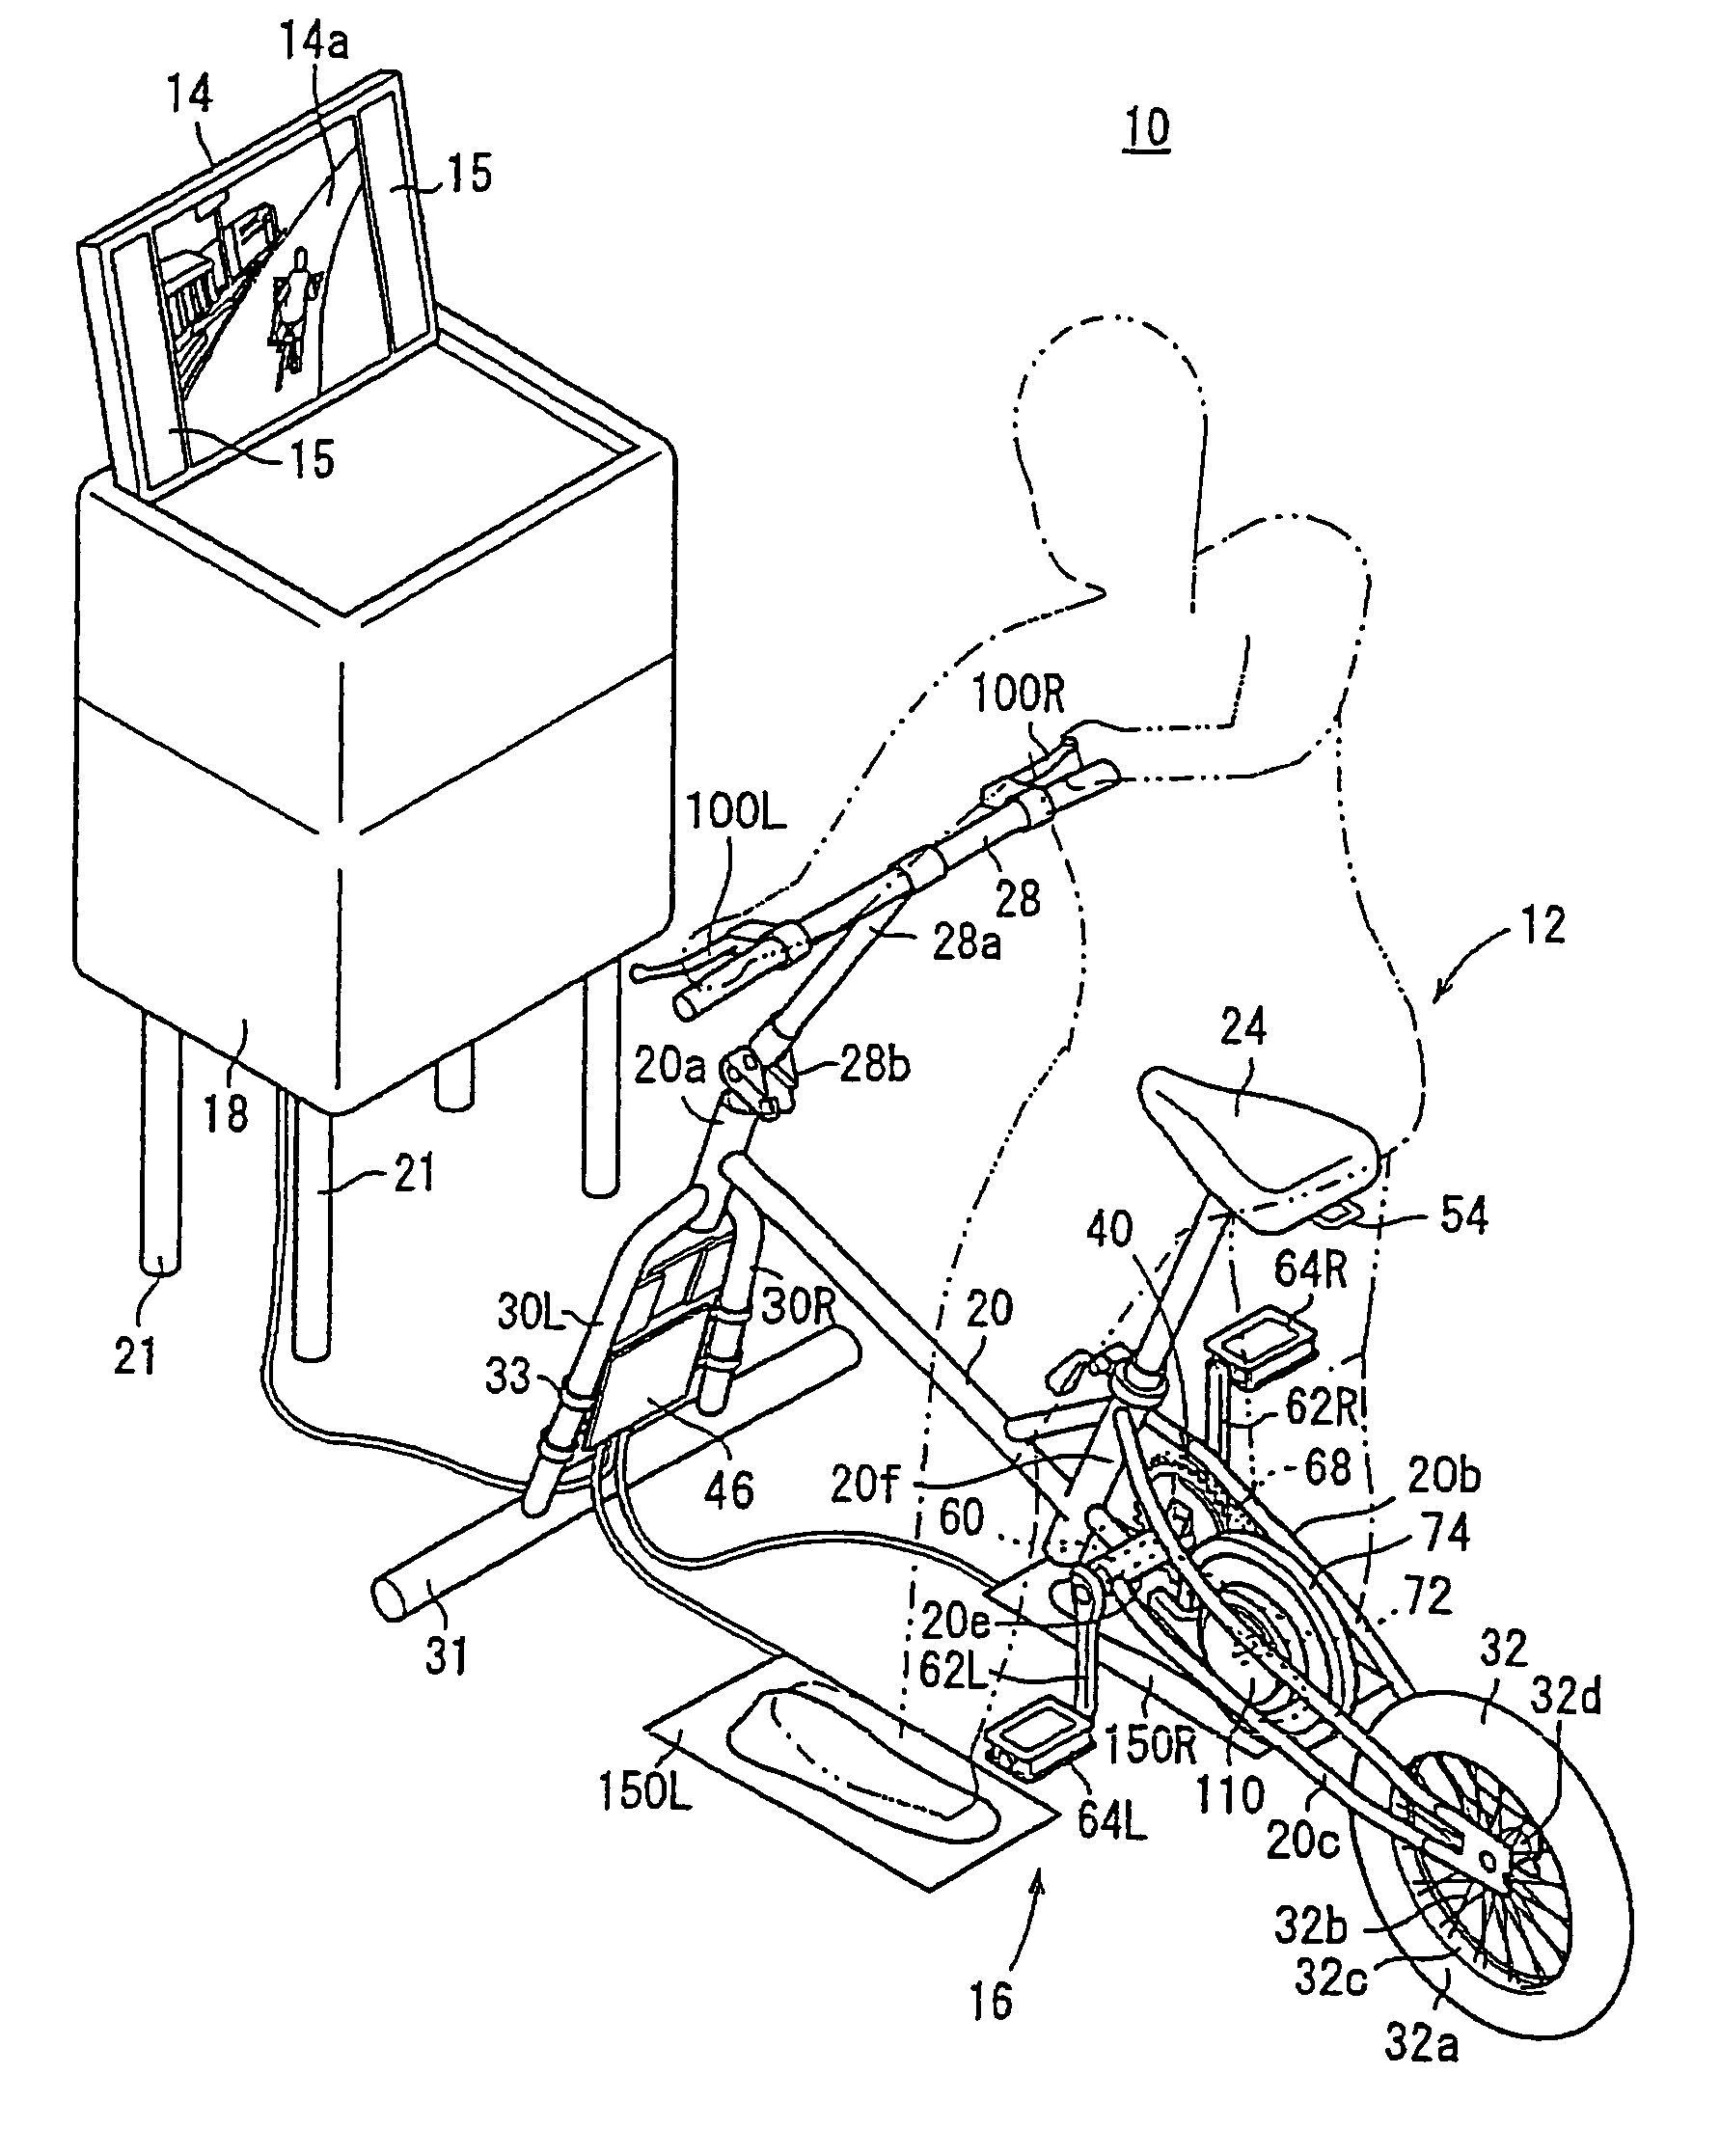 Bicycle simulation system